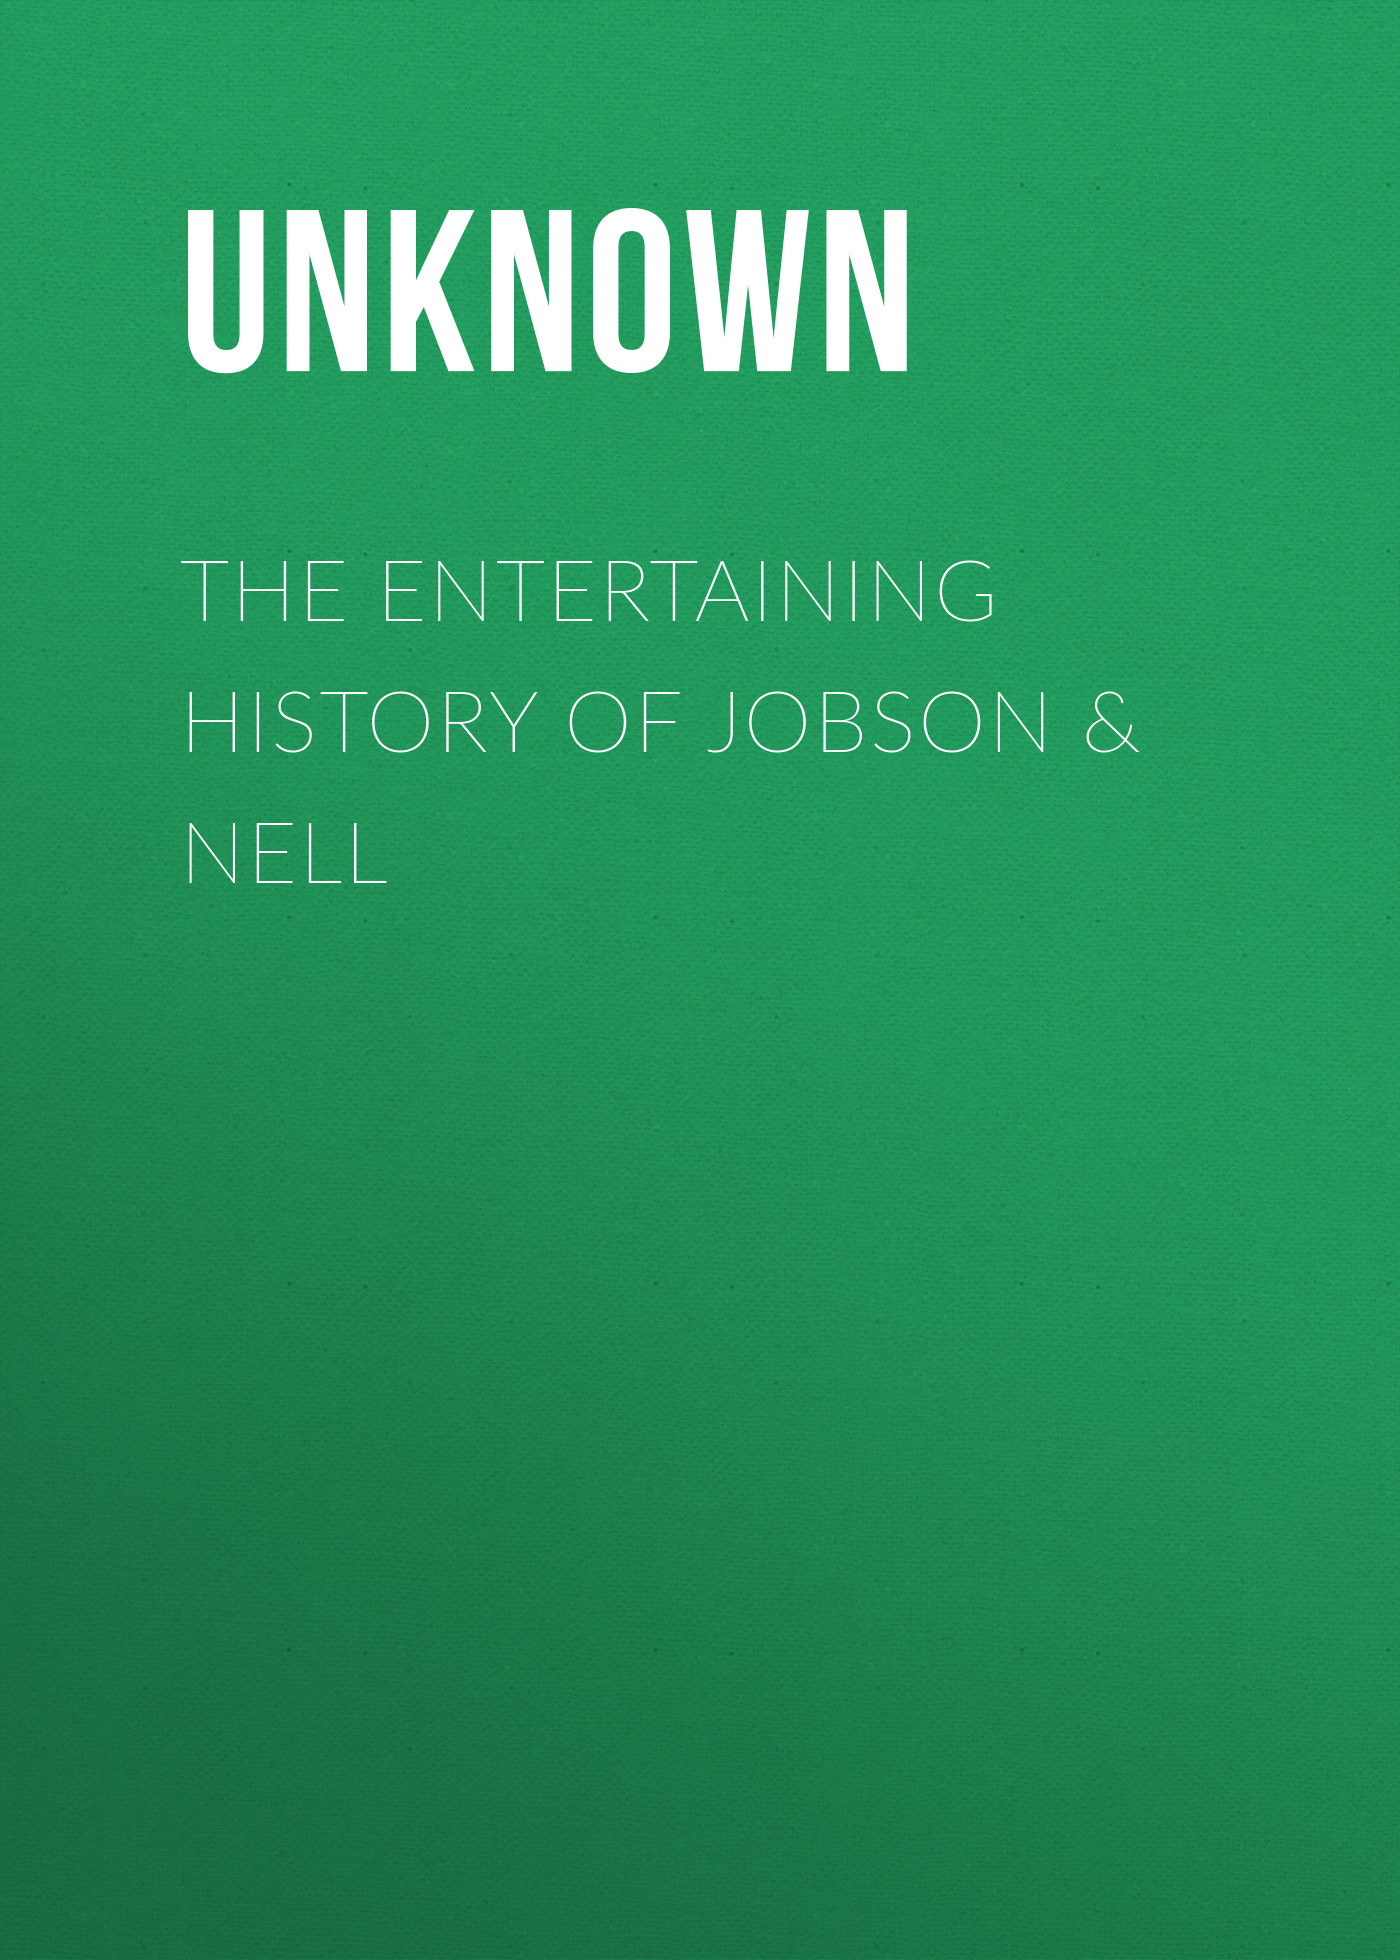 The Entertaining History of Jobson&Nell